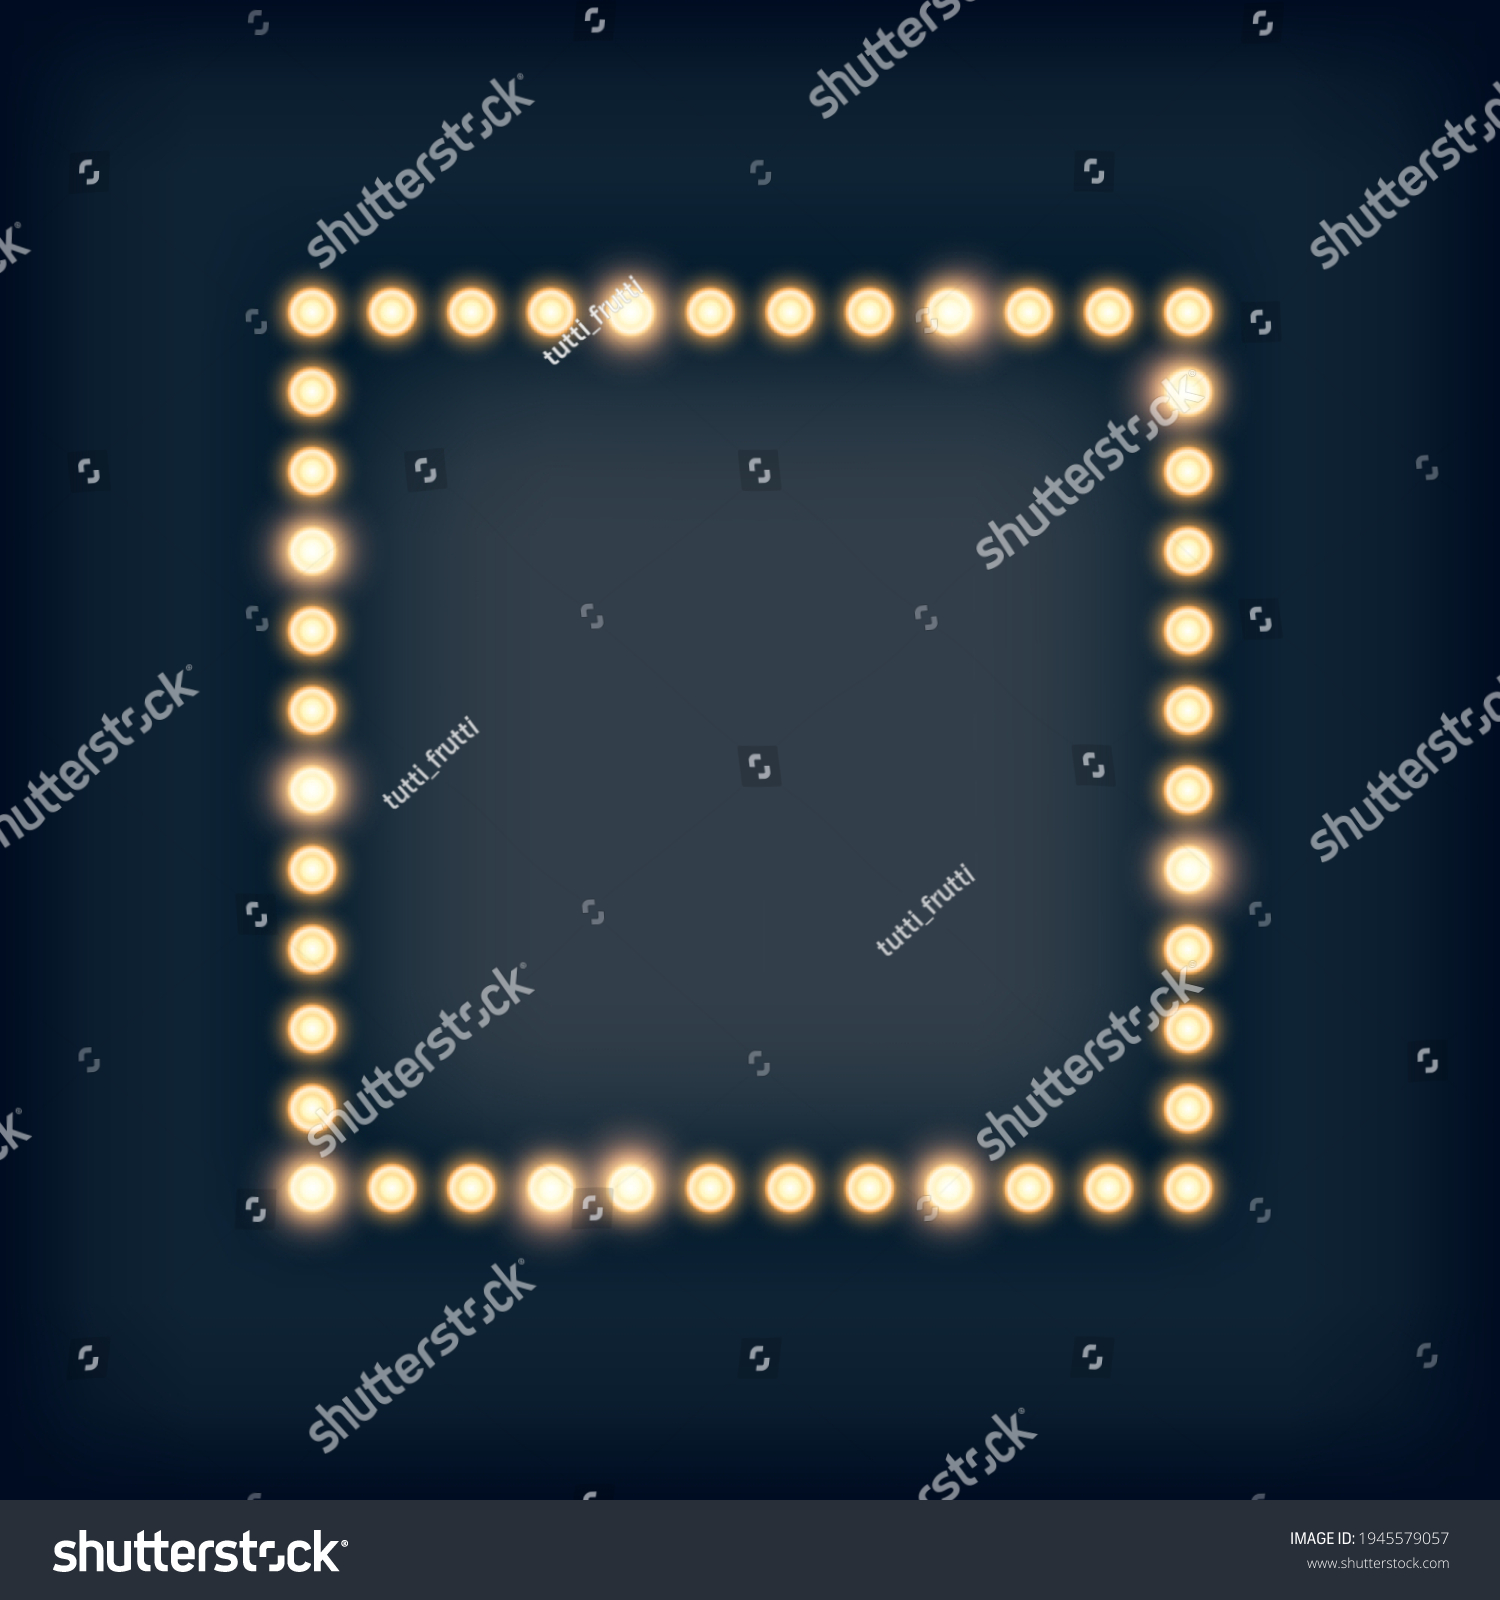 Marquee Lights Square Frame Illustration Stock Vector Royalty Free